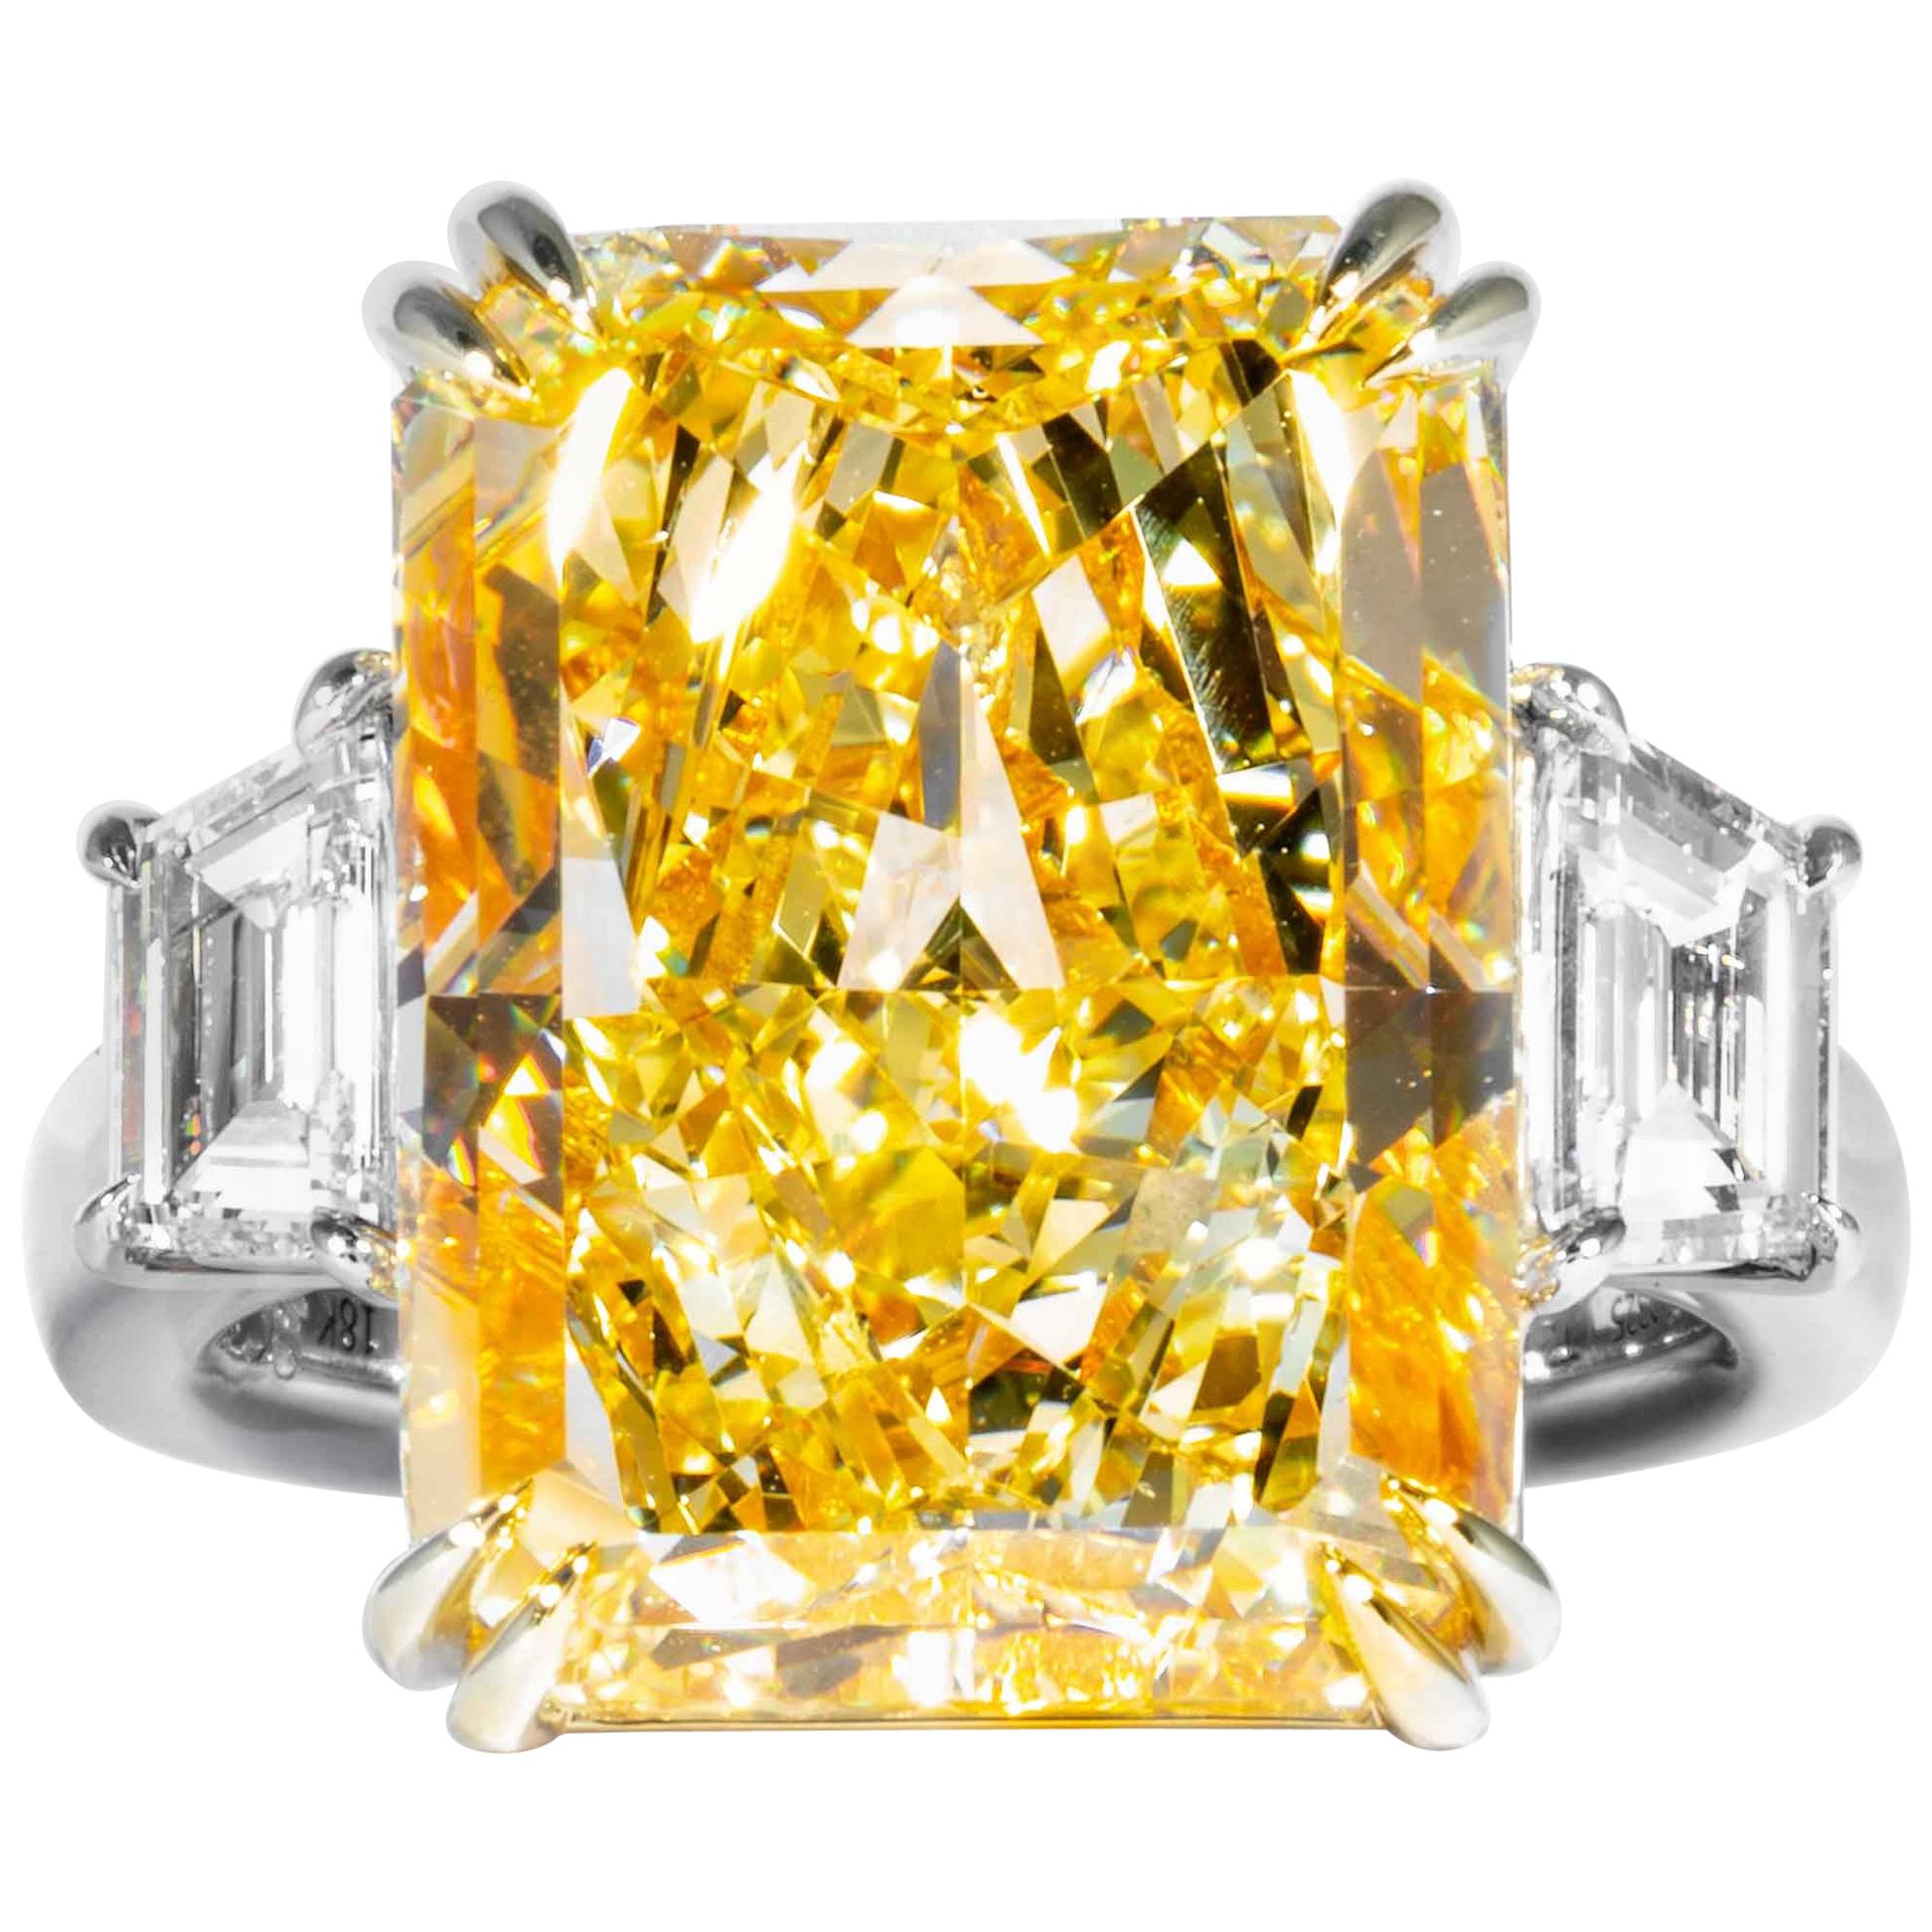 Shreve, Crump & Low GIA Certified 17.01 Carat Fancy Yellow Radiant Diamond Ring For Sale